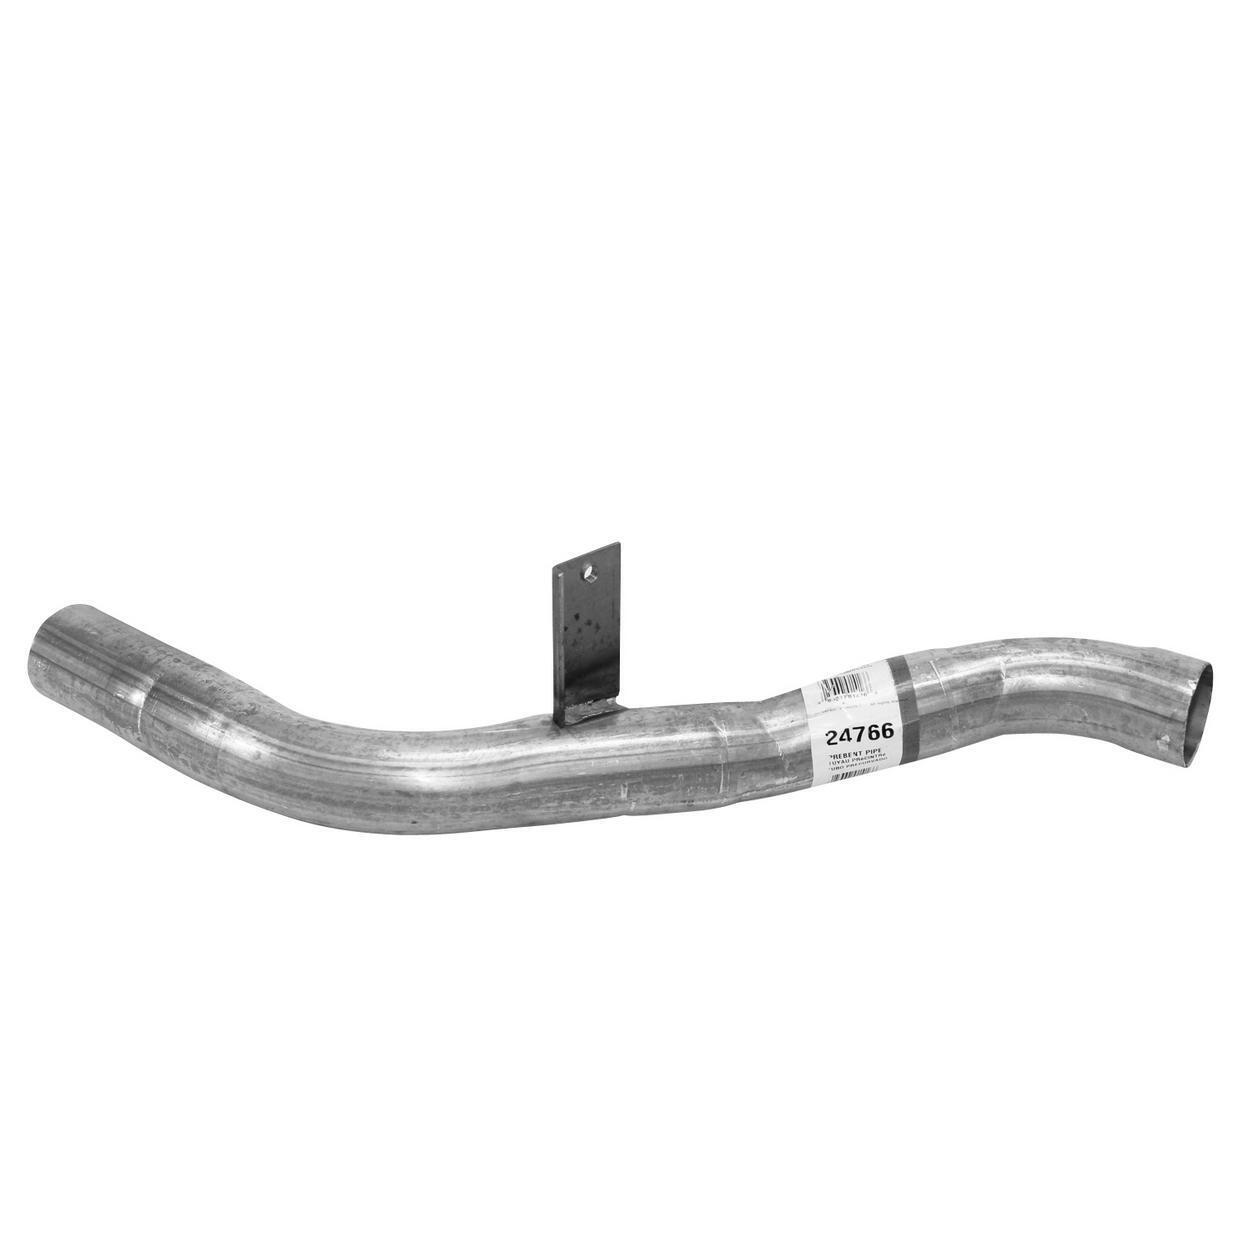 N/A Exhaust Tail Pipe Fits 1994-1996 Oldsmobile Cutlass Ciera 3.1L V6 GAS OHV